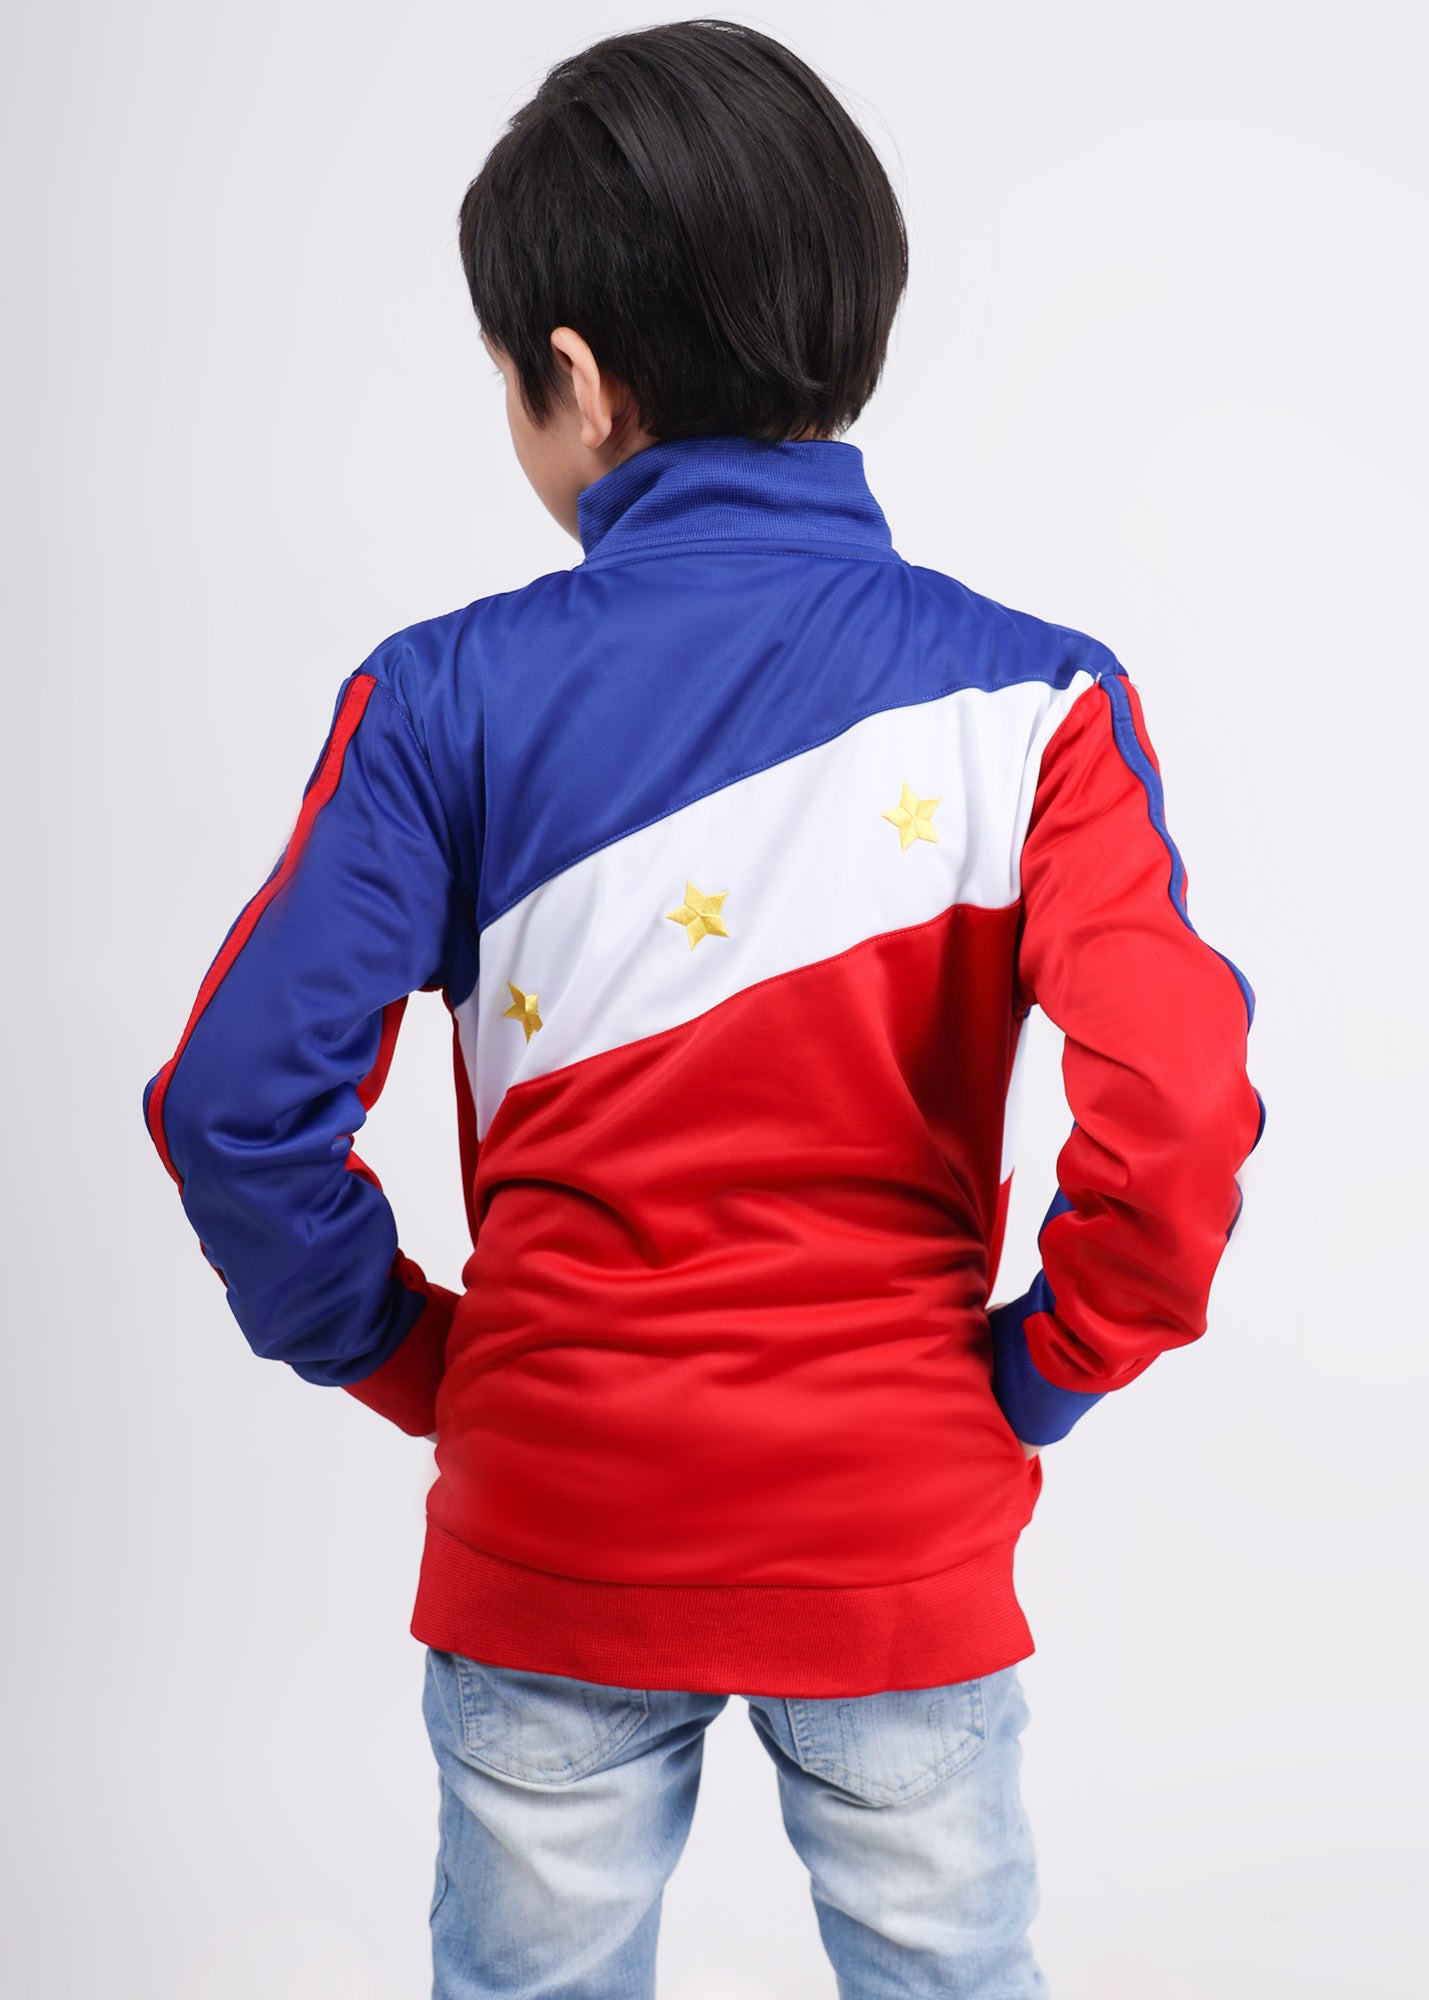 Star and Sun Flag Jacket for Kids